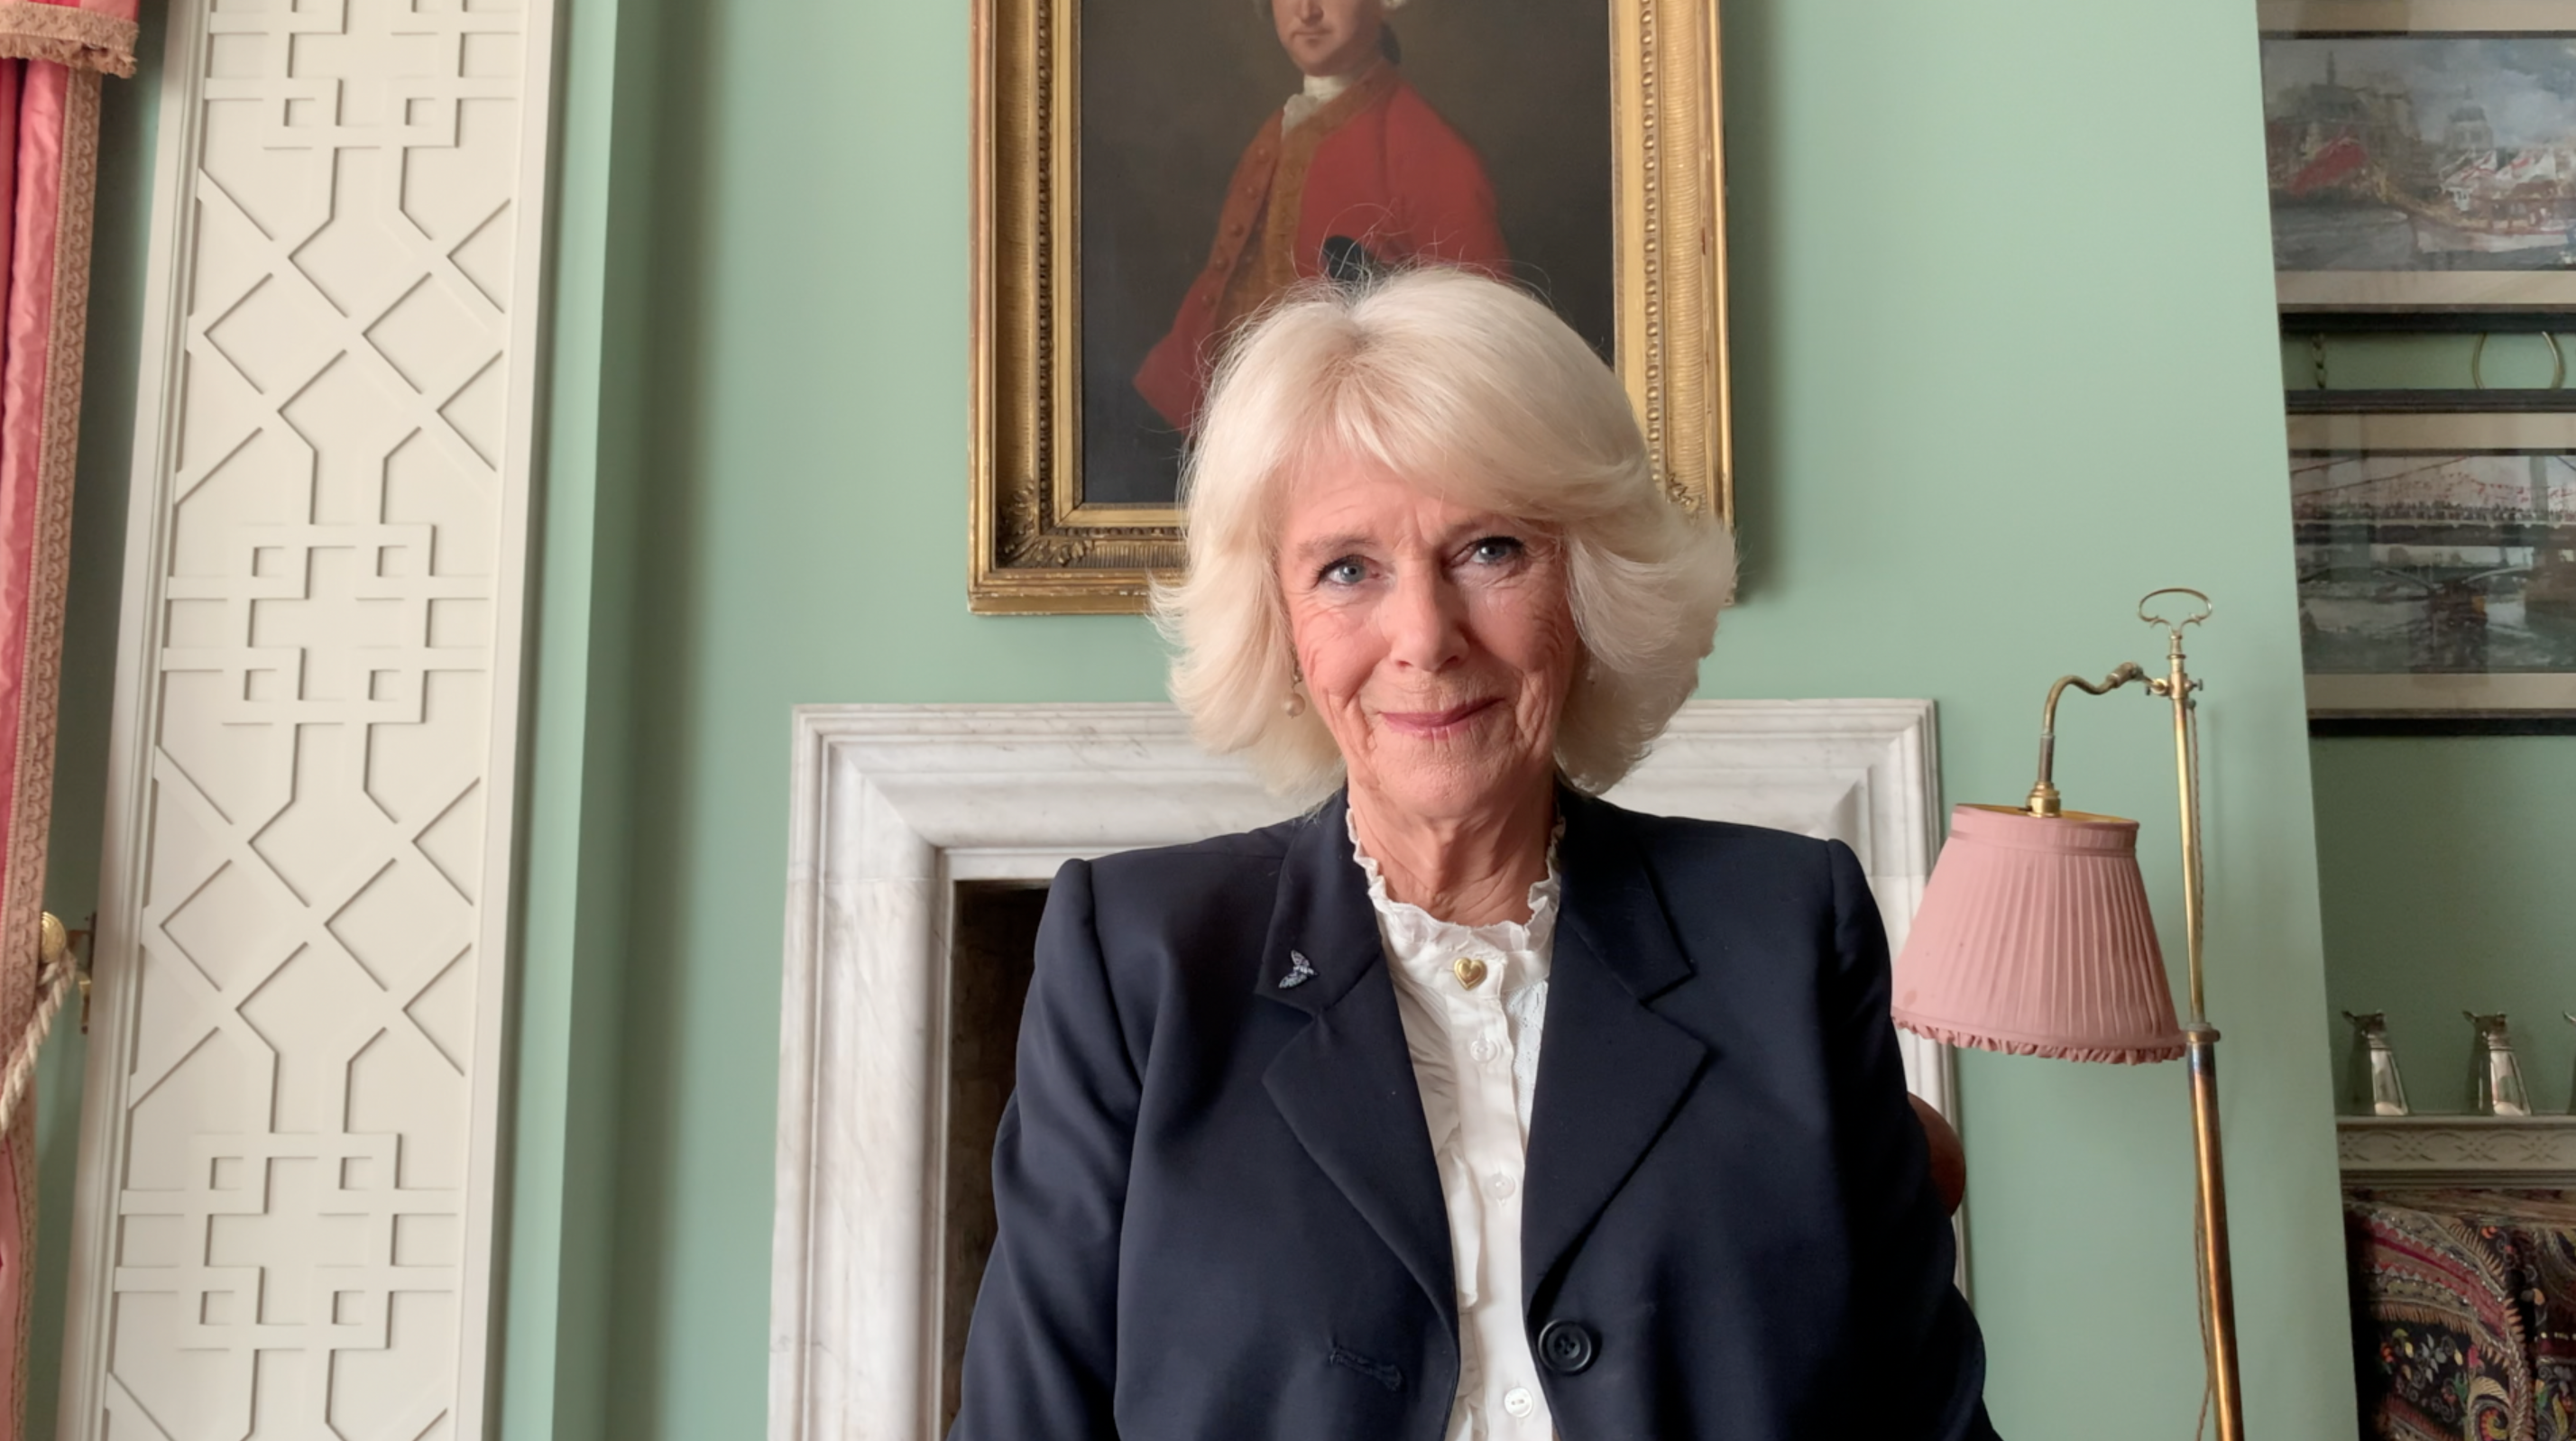 Address from Her Royal Highness the Duchess of Cornwall at World Osteoporosis Day